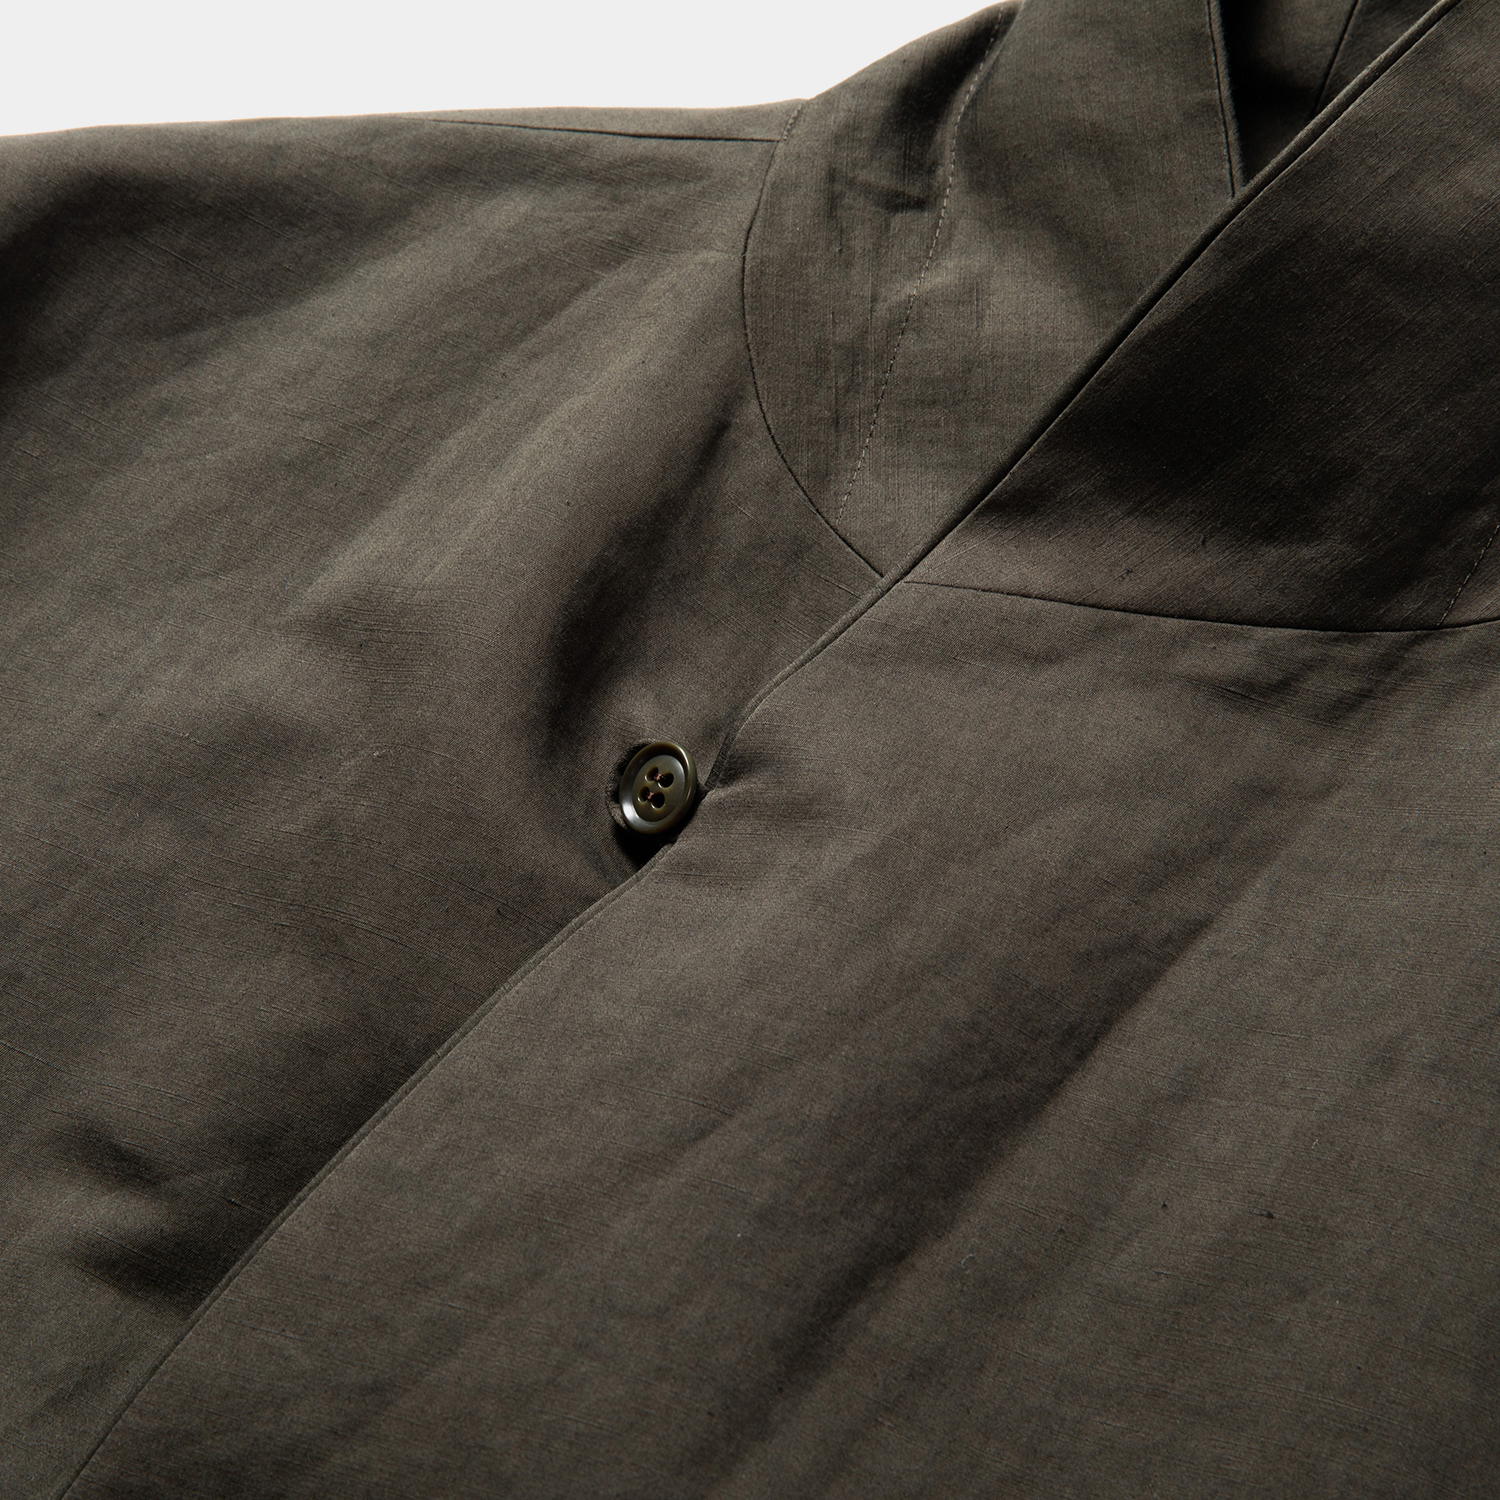 Duality Cloth Working Outfit “SAMUE” / Charcoal